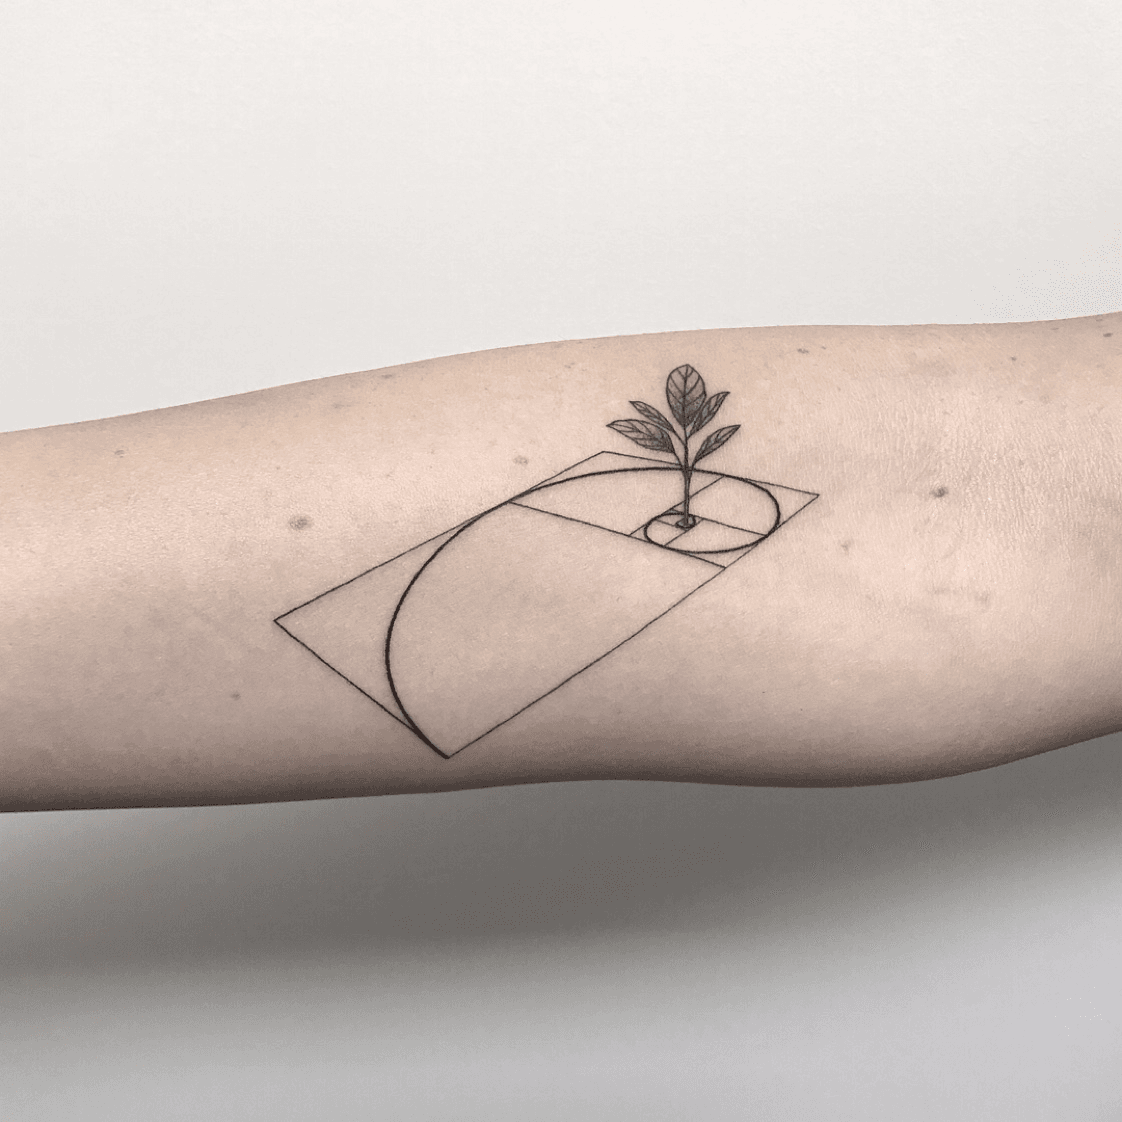 Golden ratio tattoo by Lindsay April - Tattoogrid.net